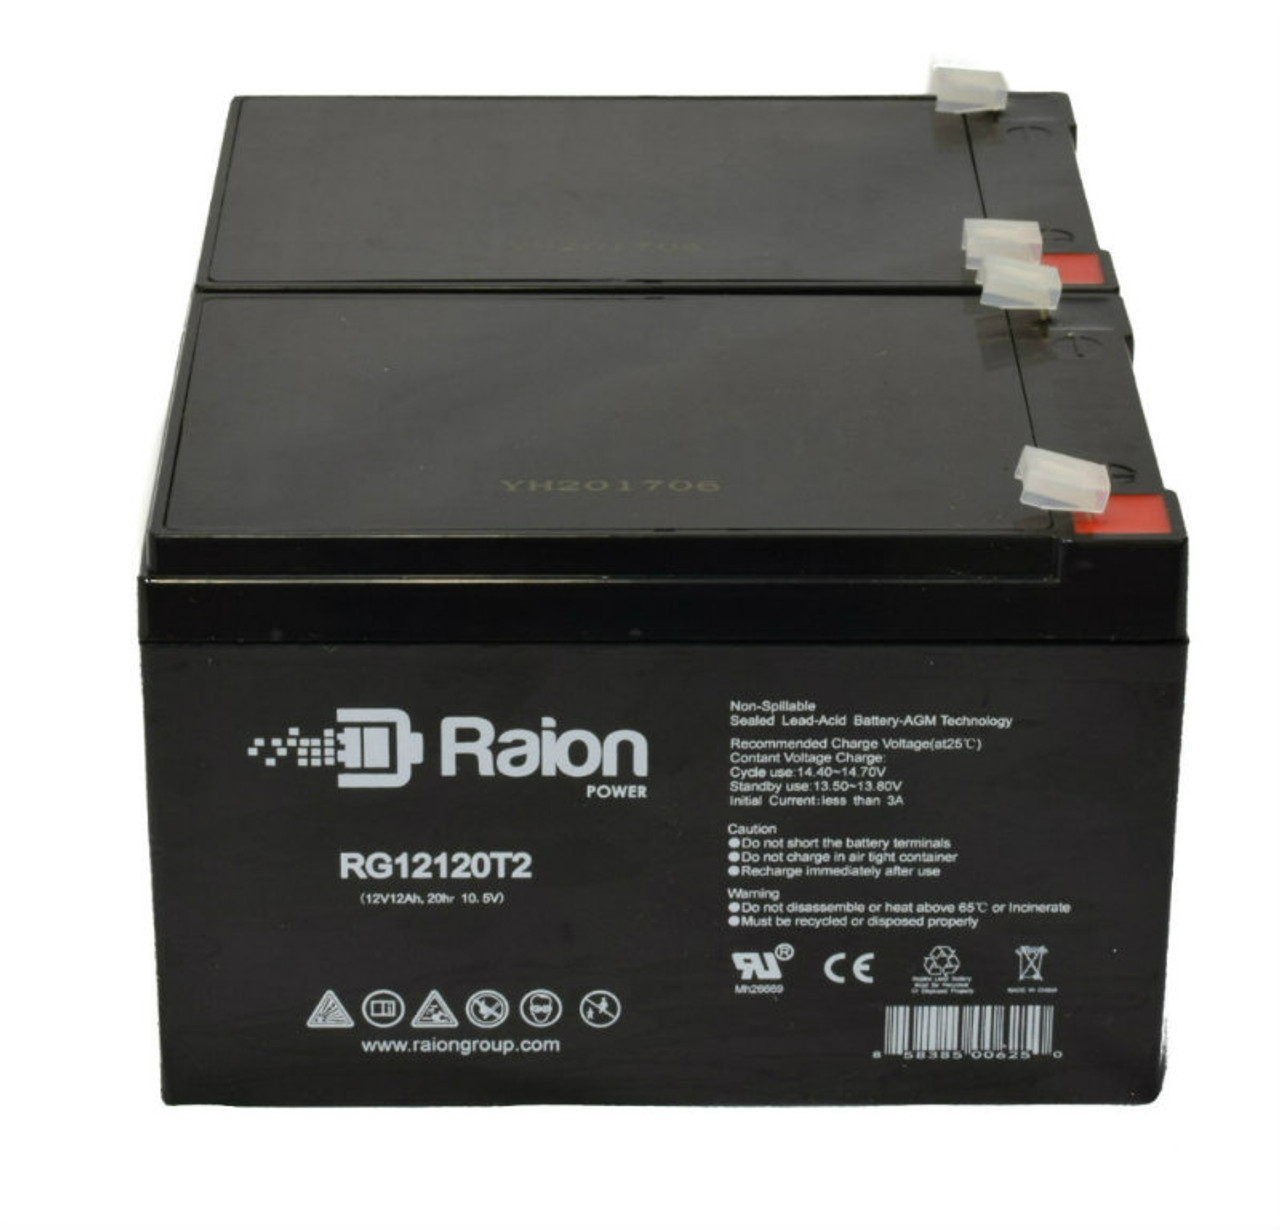 Raion Power 12V 12Ah Non-Spillable Compatible Replacement Battery for Rascal EM100 (2) - (2 Pack)